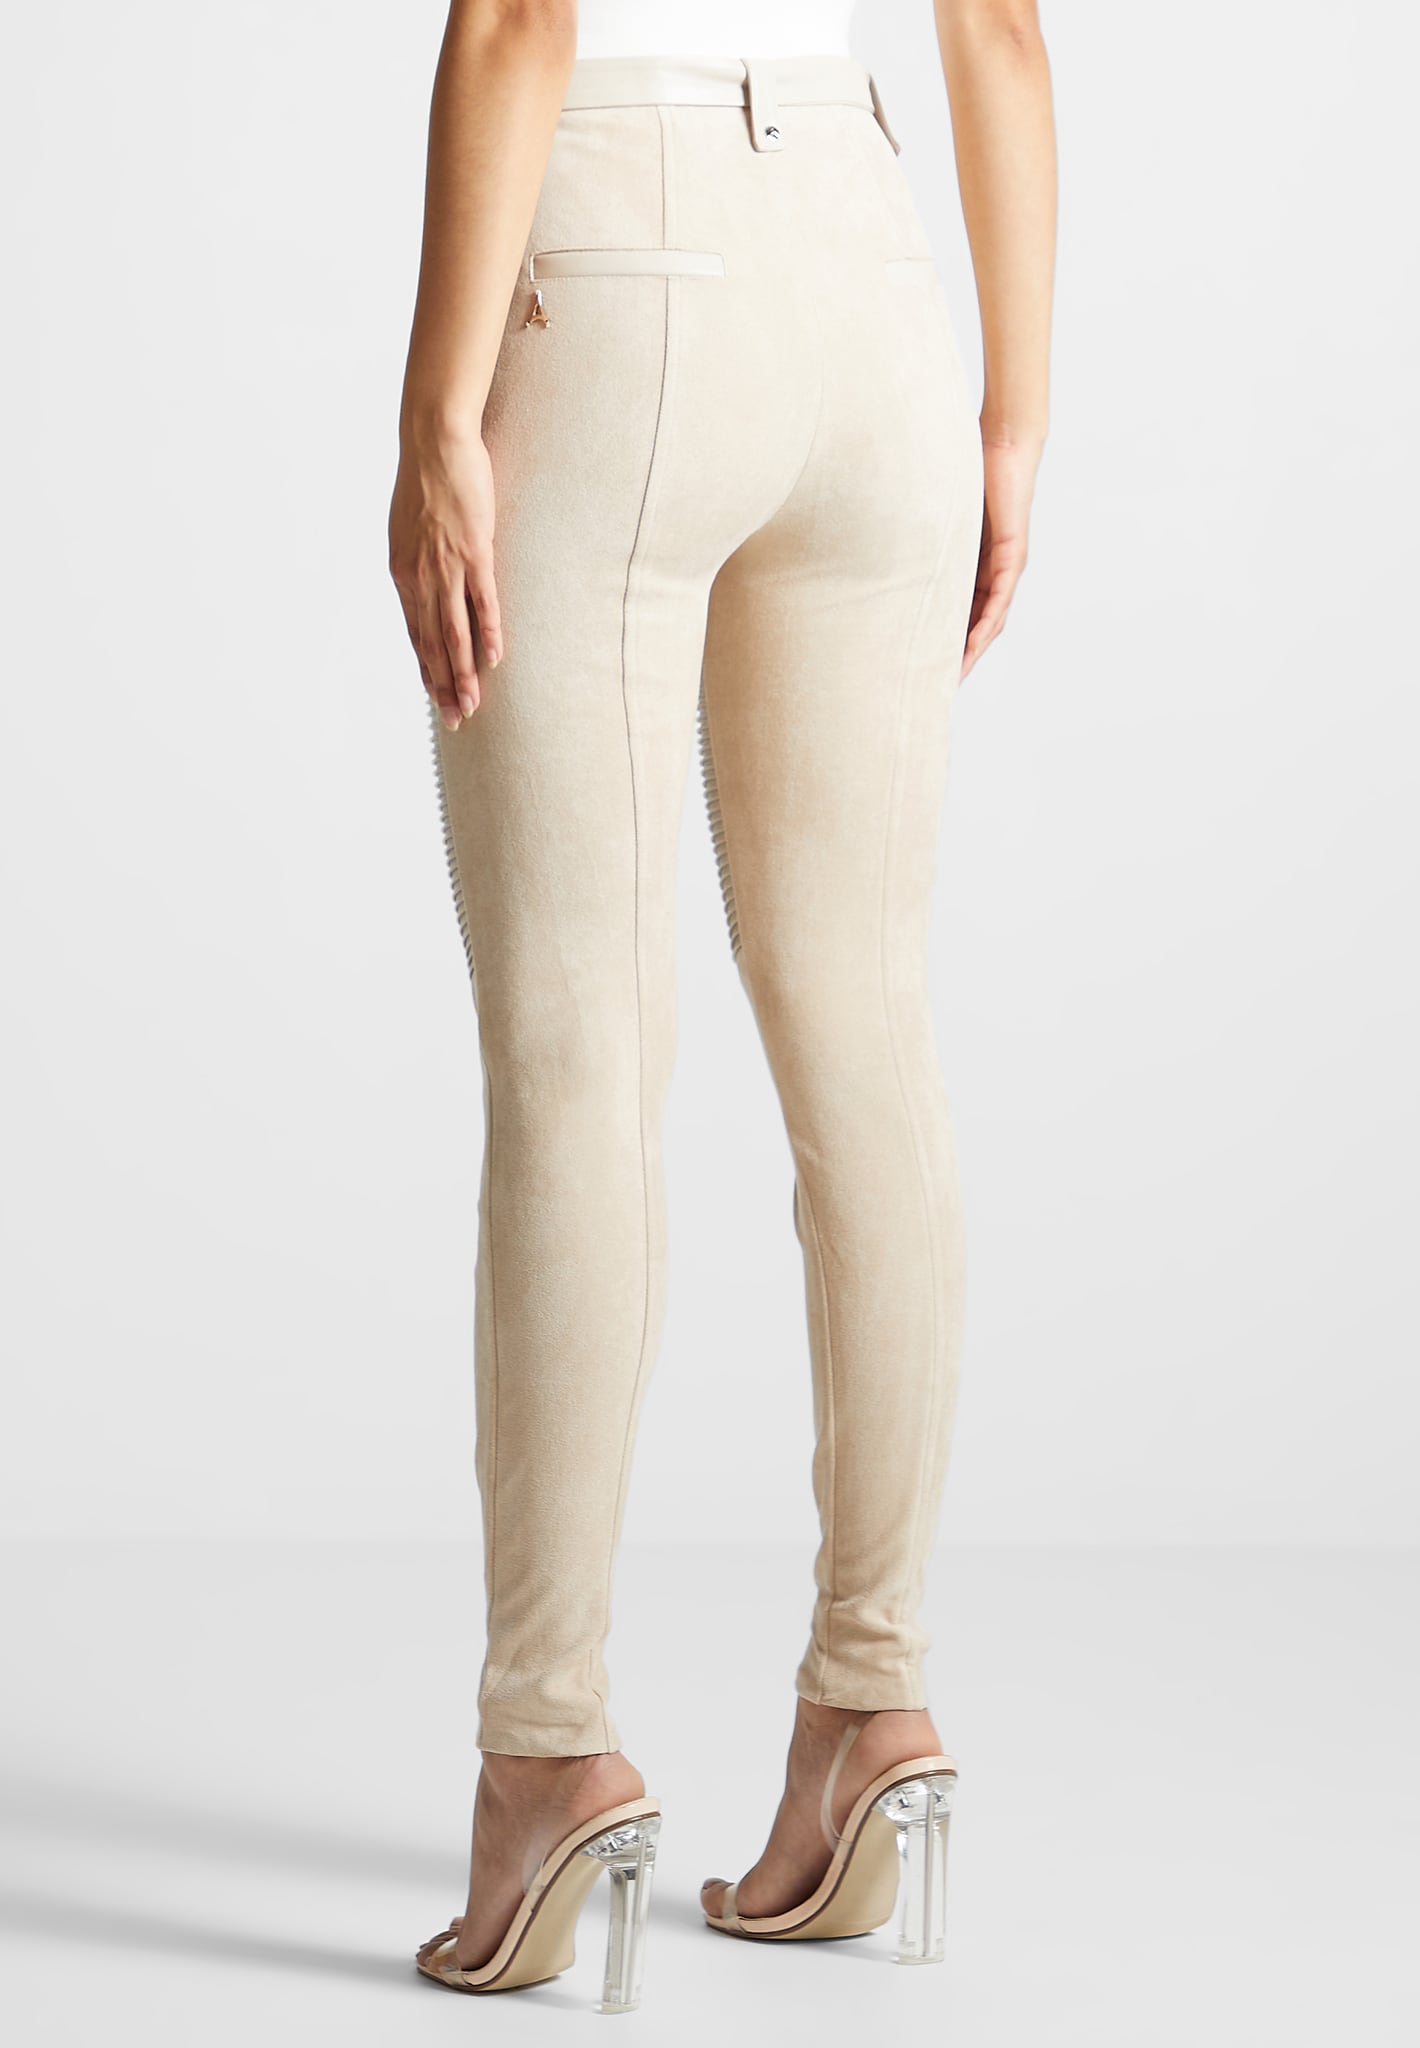 HOUSE OF CB Amara Lace-Up Faux Suede Trousers | Nordstrom | Faux suede,  Suede, House of cb